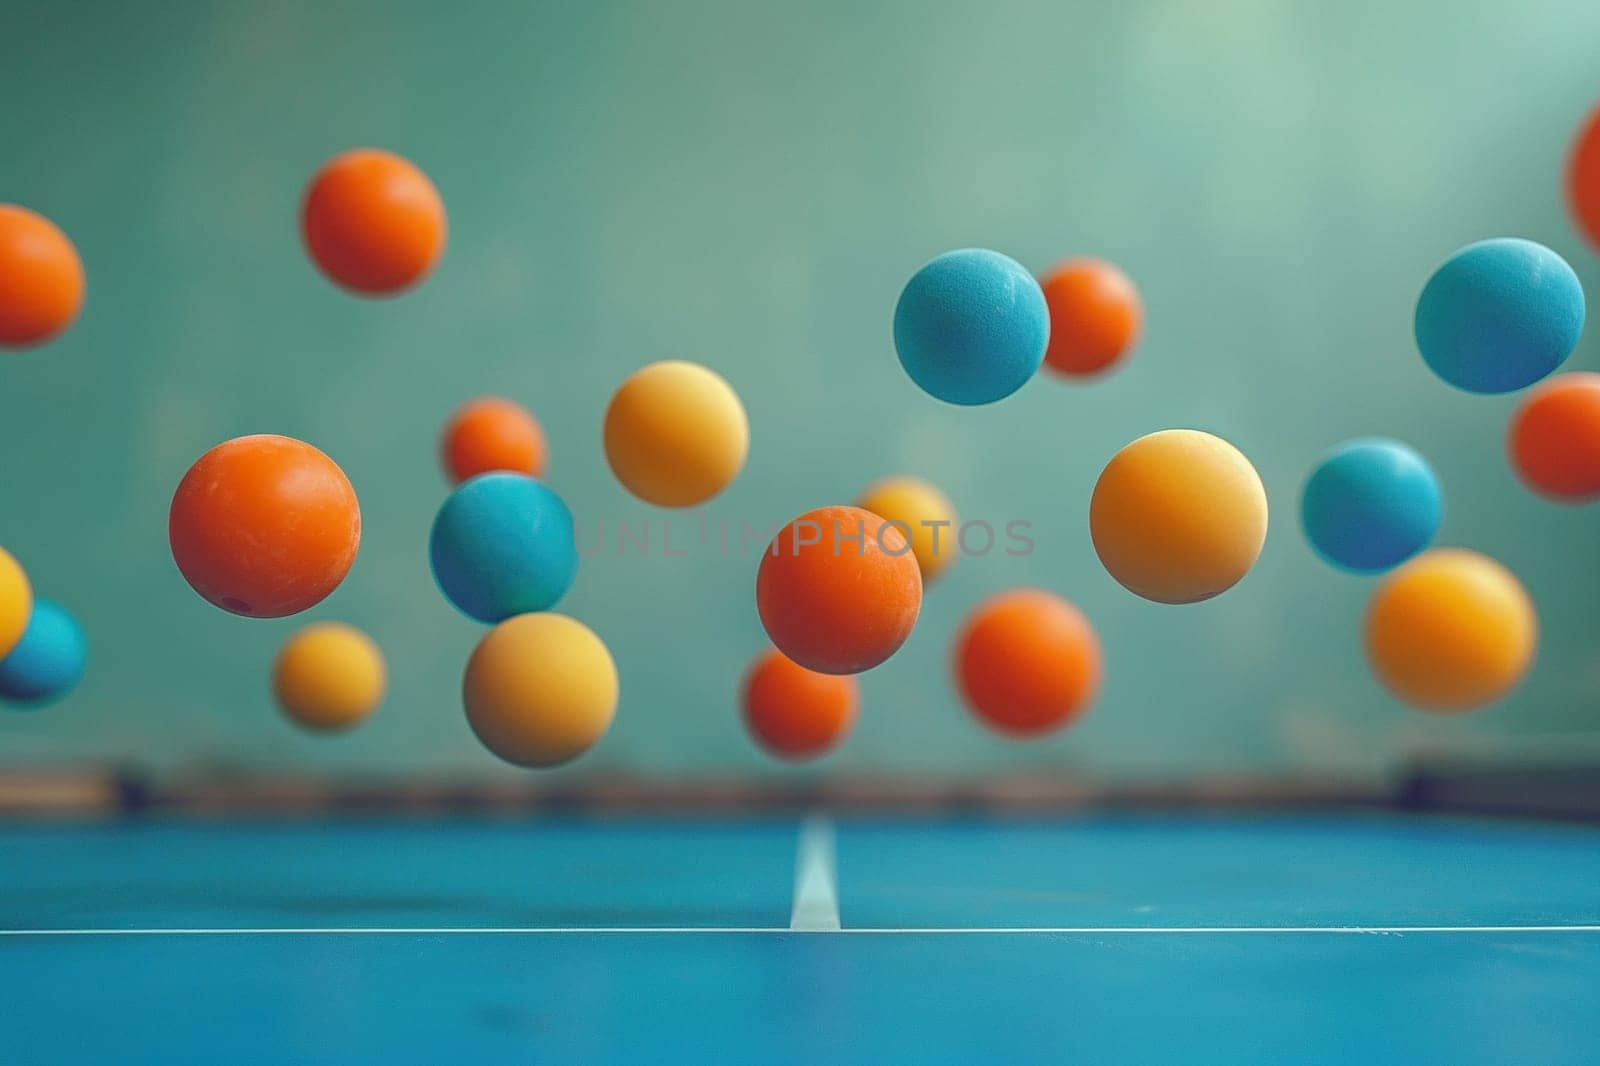 Orange and blue ping pong balls bounce on a tennis table. Concept of sport, hobby.